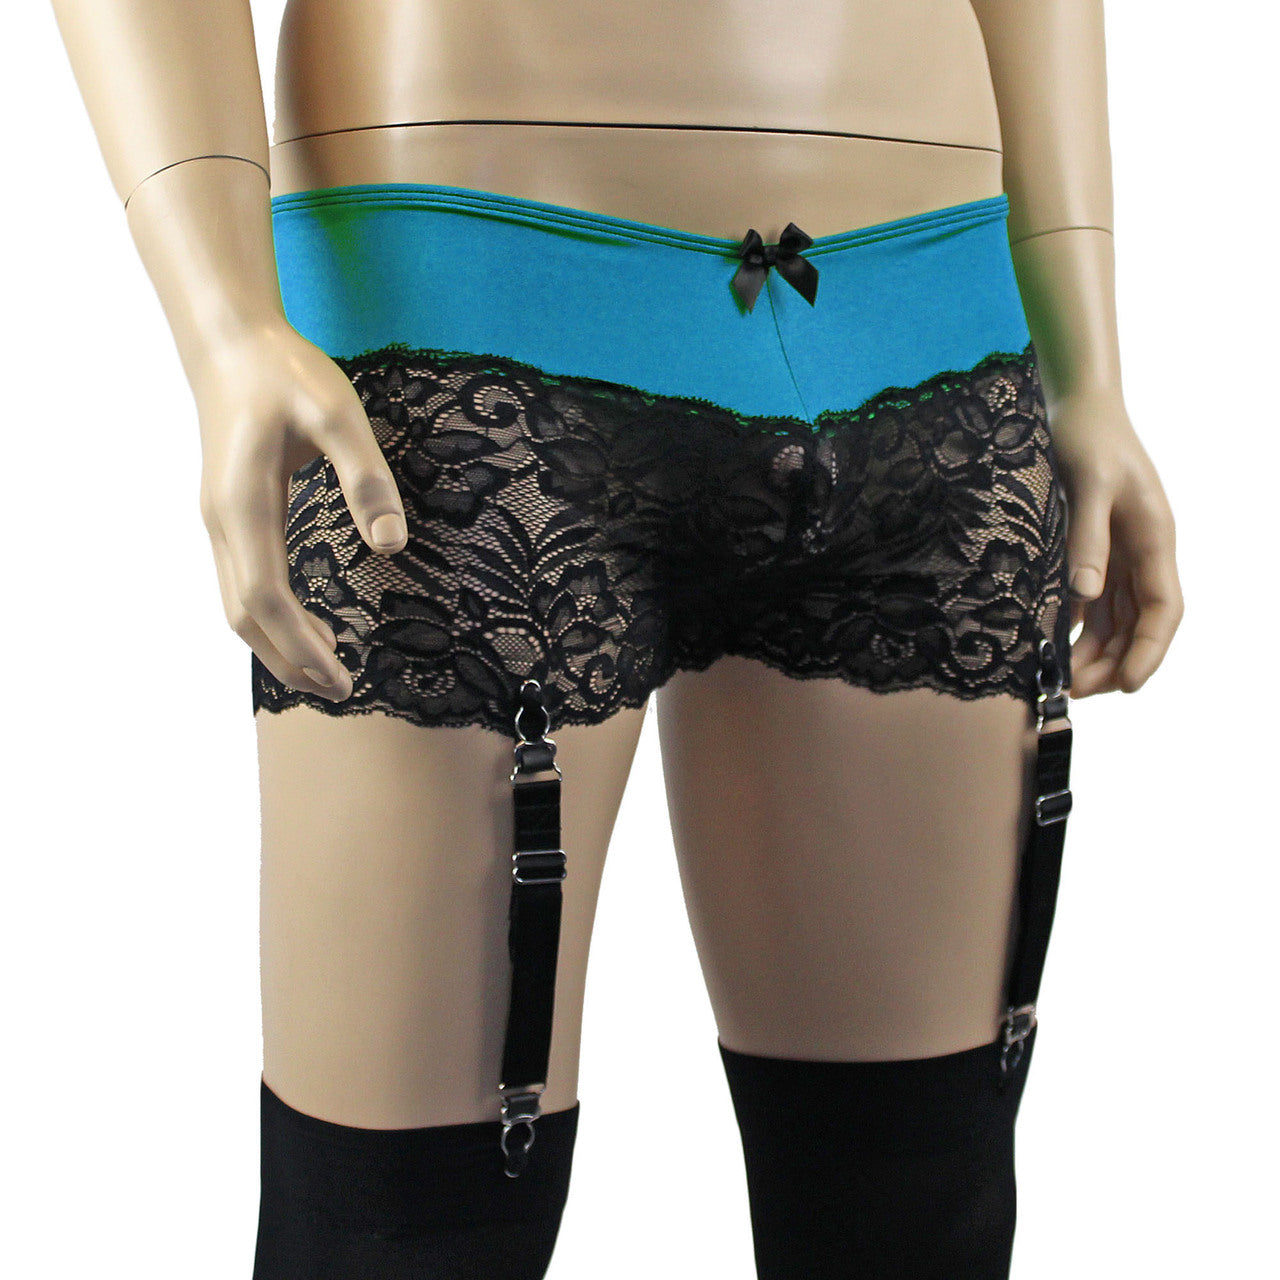 Mens Risque Boxer Briefs with Detachable Garters & Stockings (teal and black plus other colours)